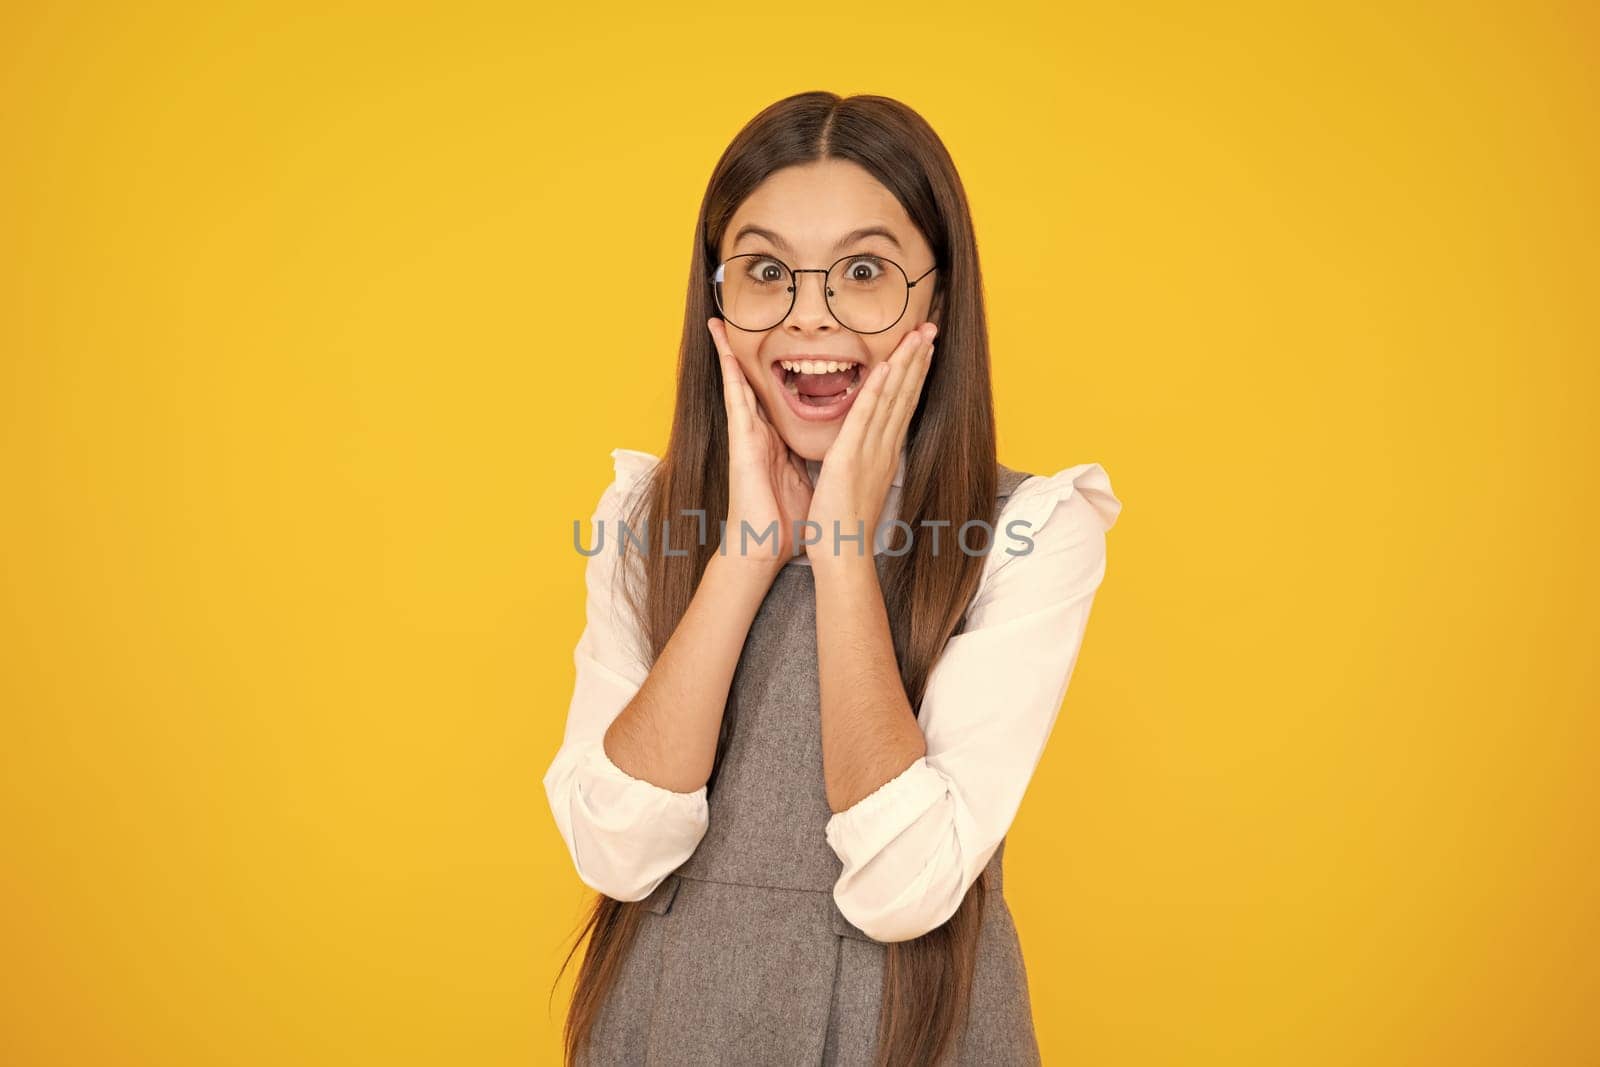 Shocked teenager child girl portrait isolated on yellow background. Excited face. Amazed expression, cheerful and glad